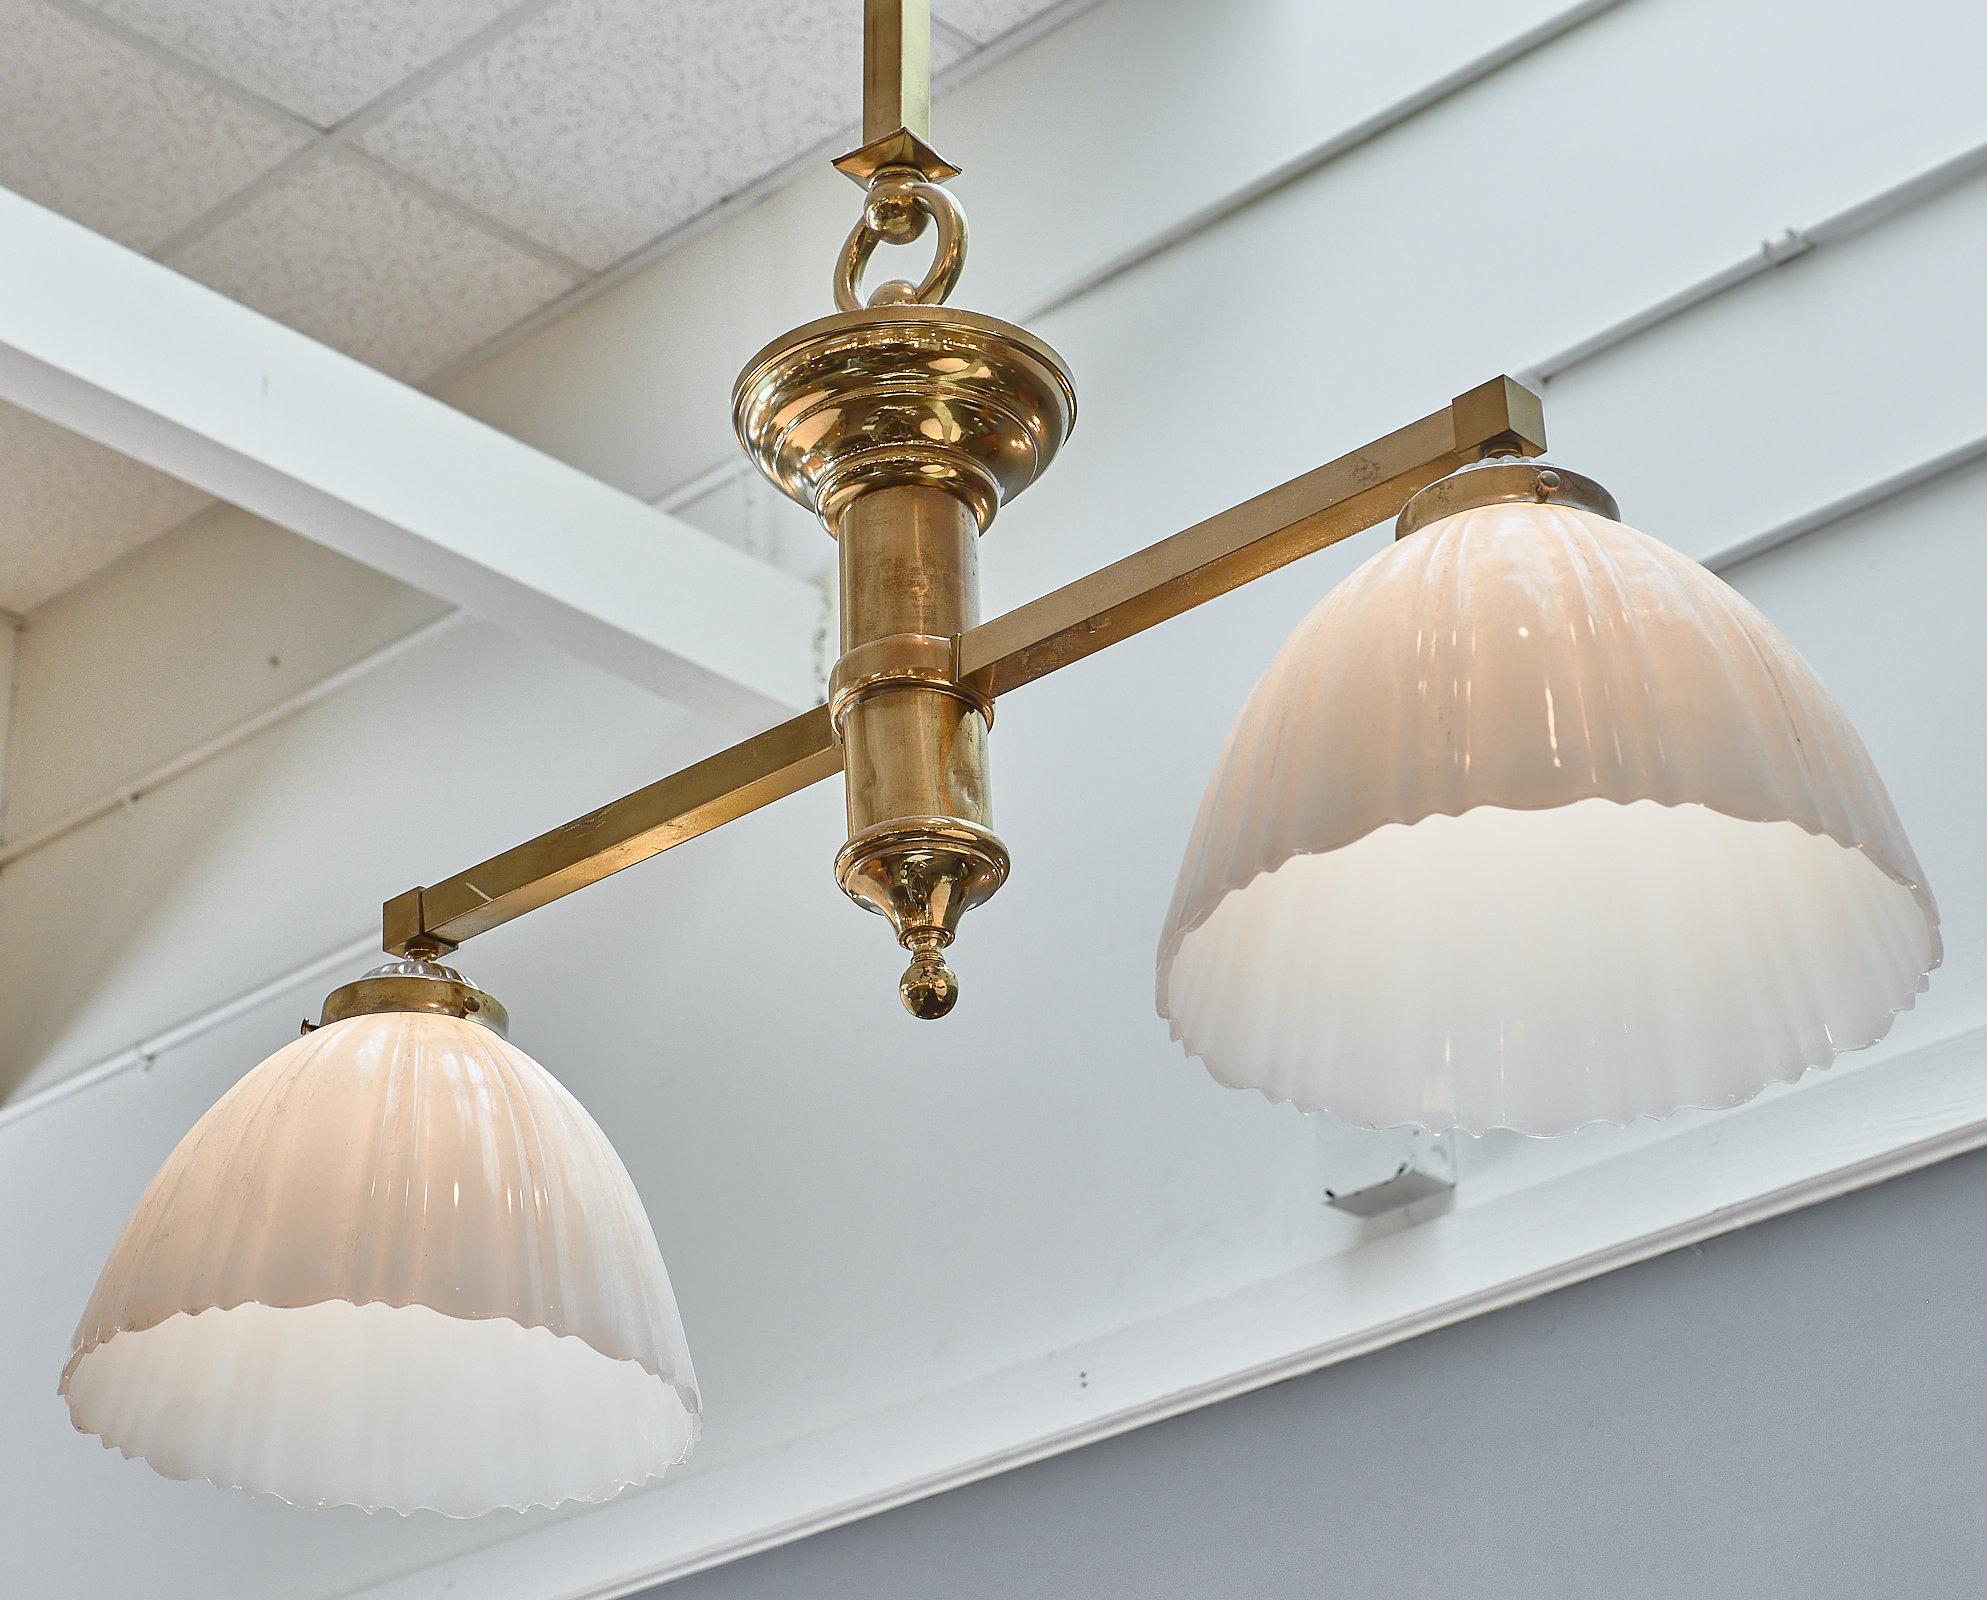 A large American all original billiard table pendant light with a brass structure and opaline glass shades.